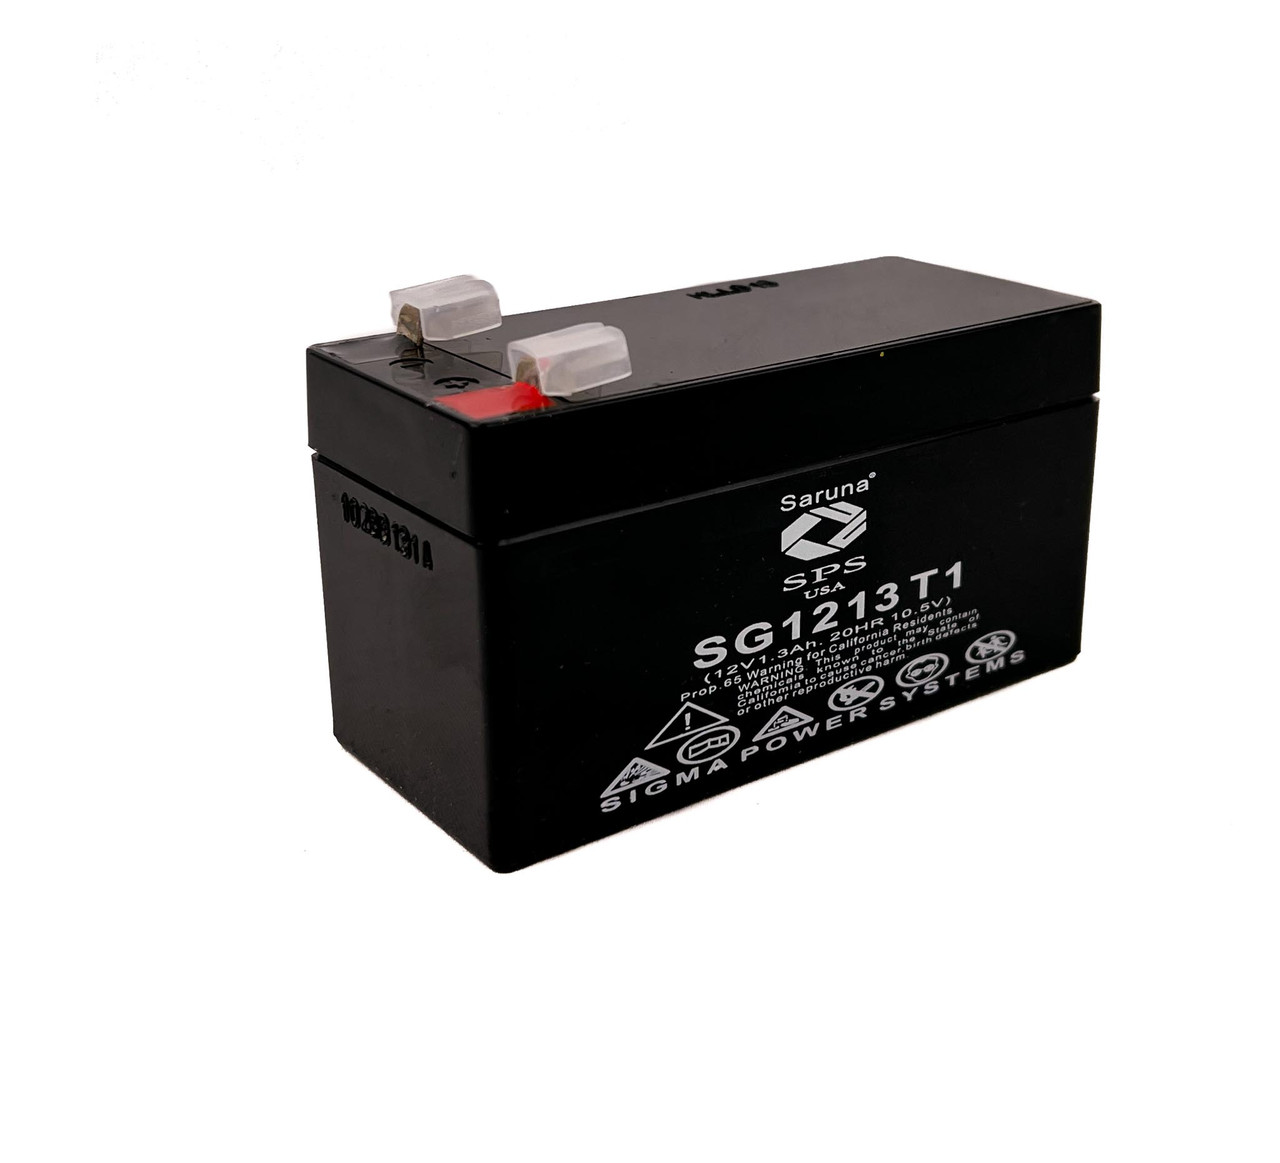 Raion Power 12V 1.3Ah Non-Spillable Replacement Rechargebale Battery for 2012 Mercedes-Benz ML 550 Base 4.6L V8 Gas